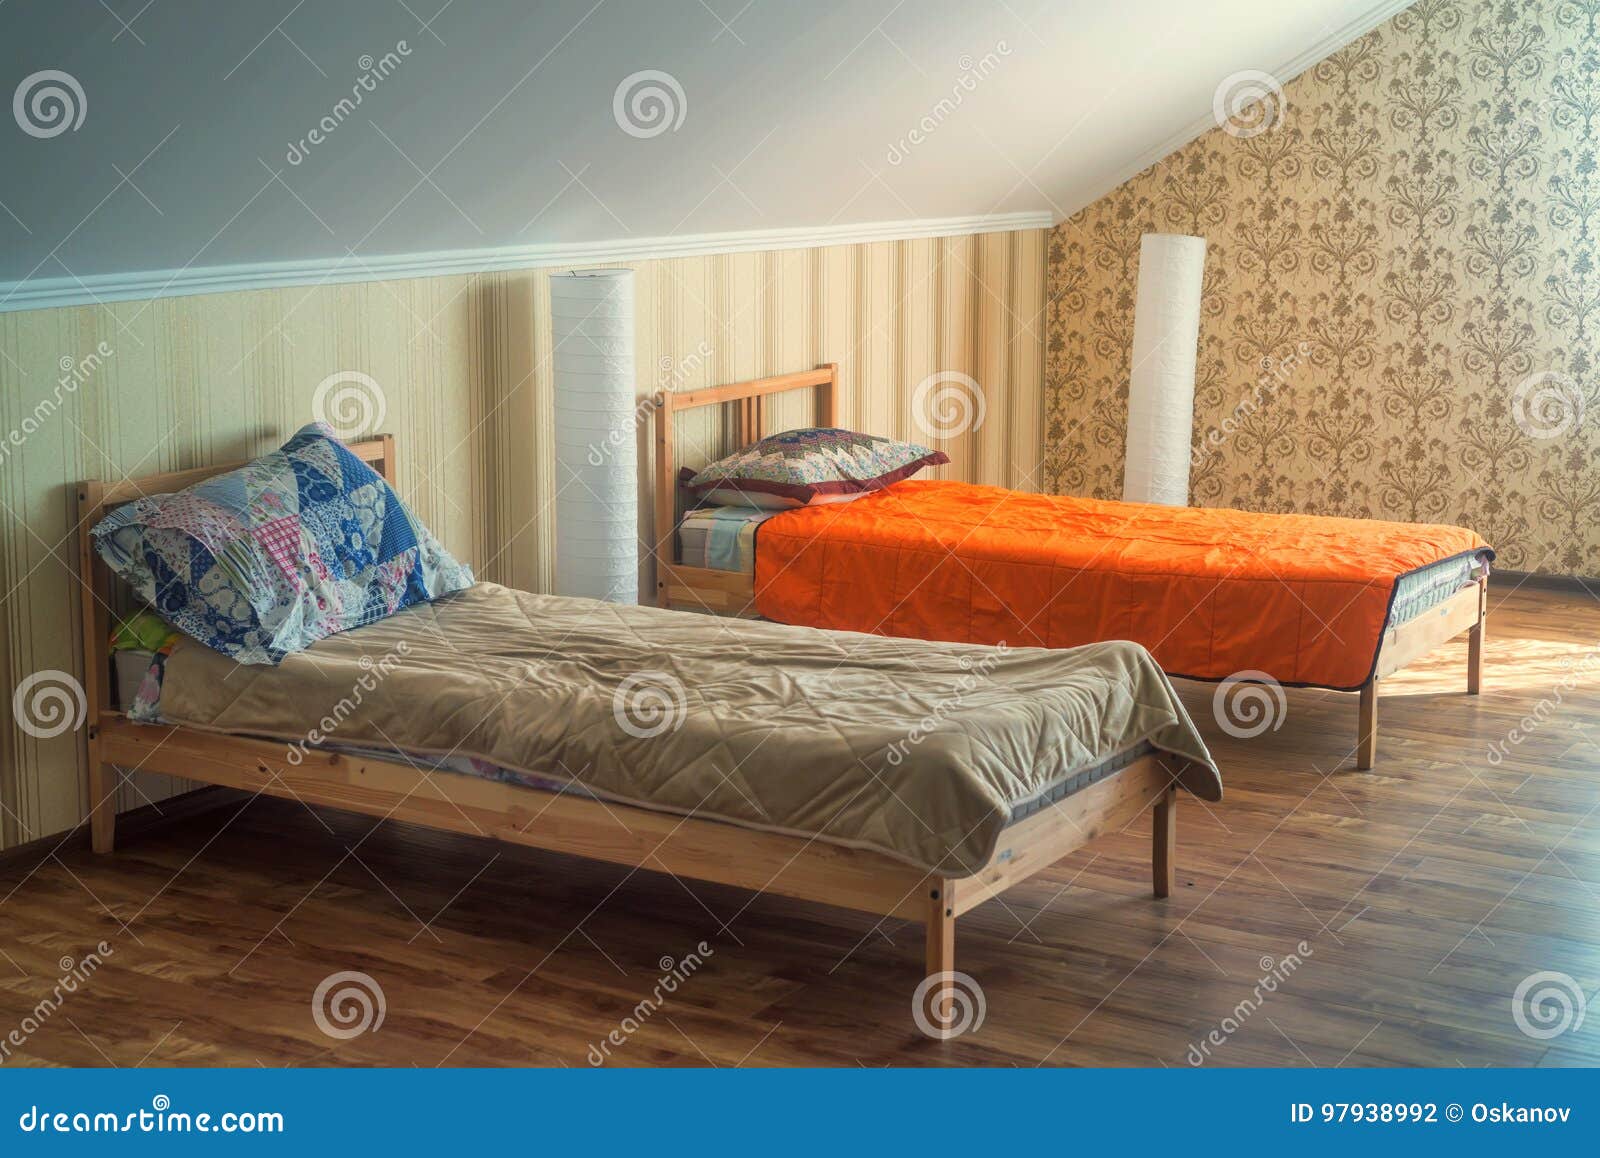 Interior Of Small Hostel Room With Two Beds Stock Photo Image Of Furniture Indoor 97938992,Fire Sprinkler Head Design